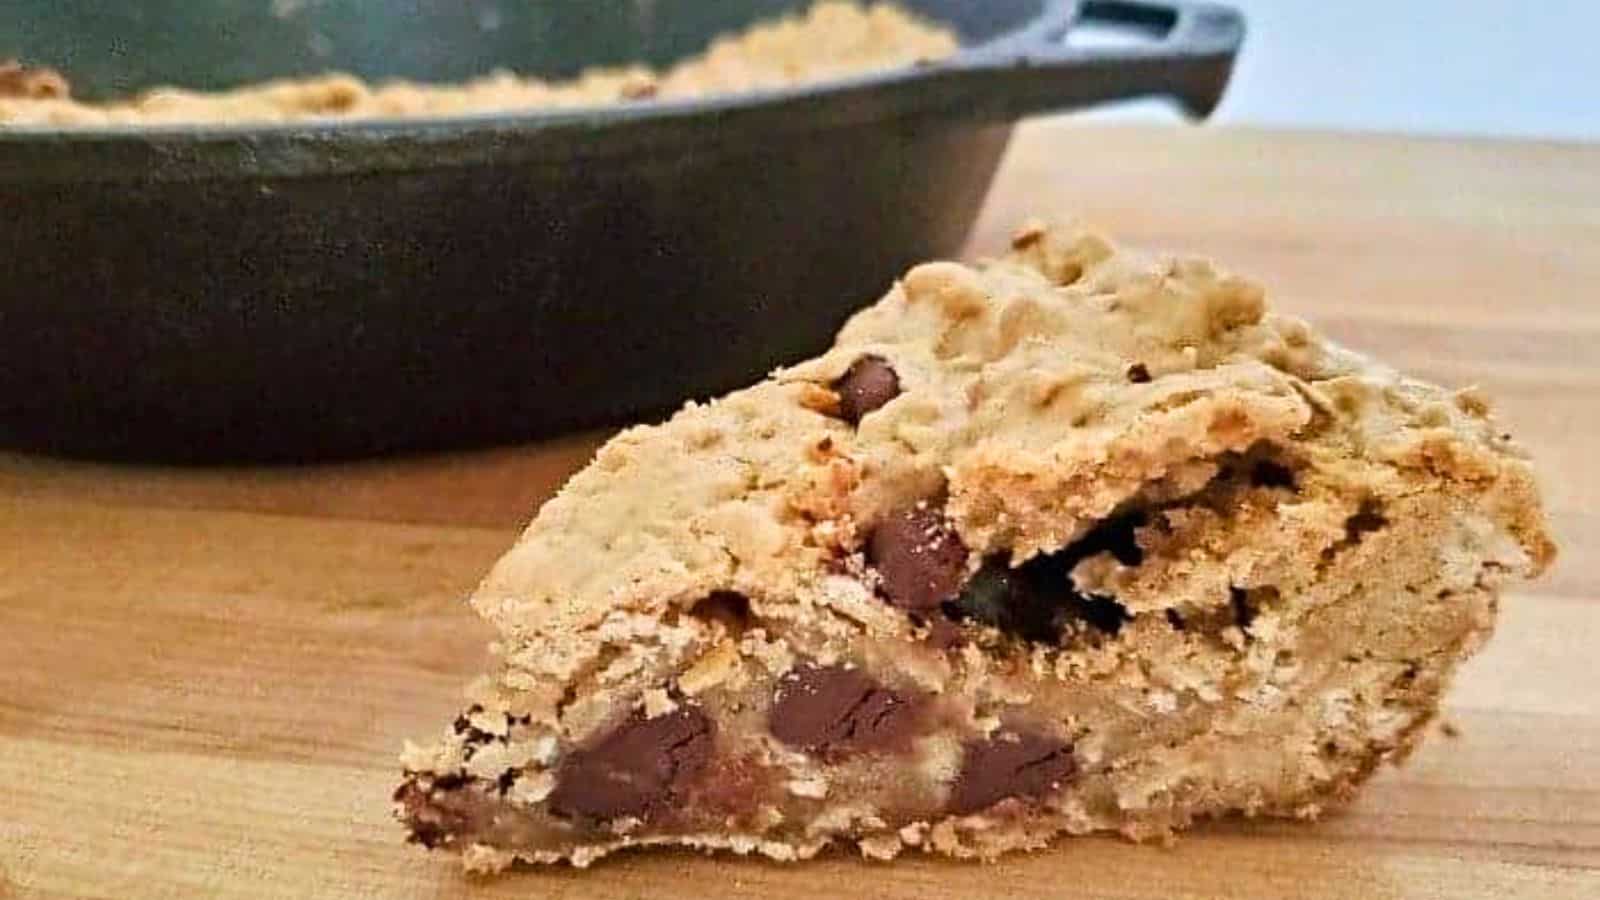 Image shows A piece of chocolate chip skillet cookie in front of a cast iron pan.